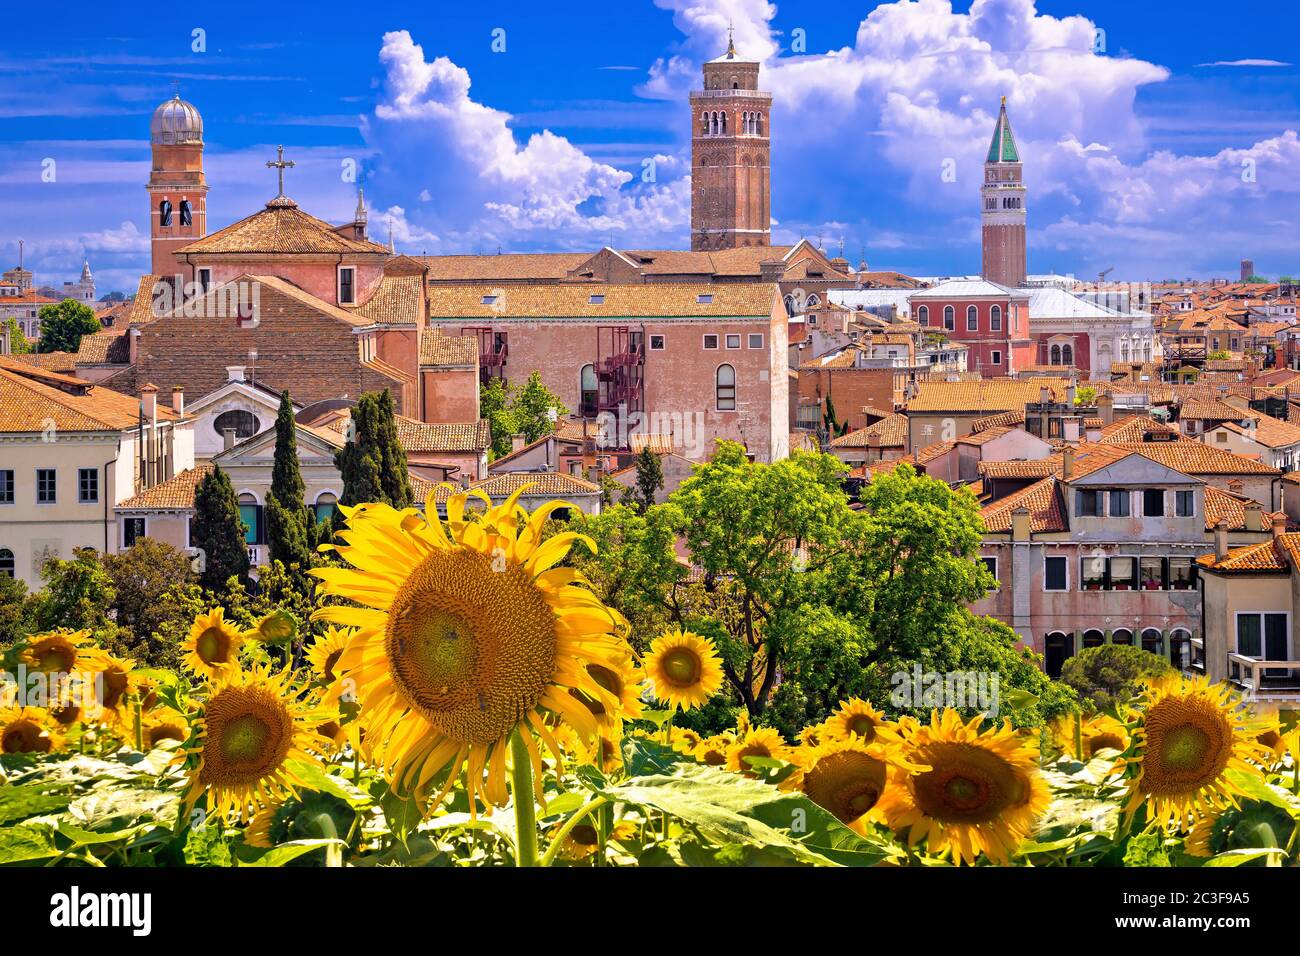 Skyline and rooftops of Venice view from sunflower terrace Stock Photo